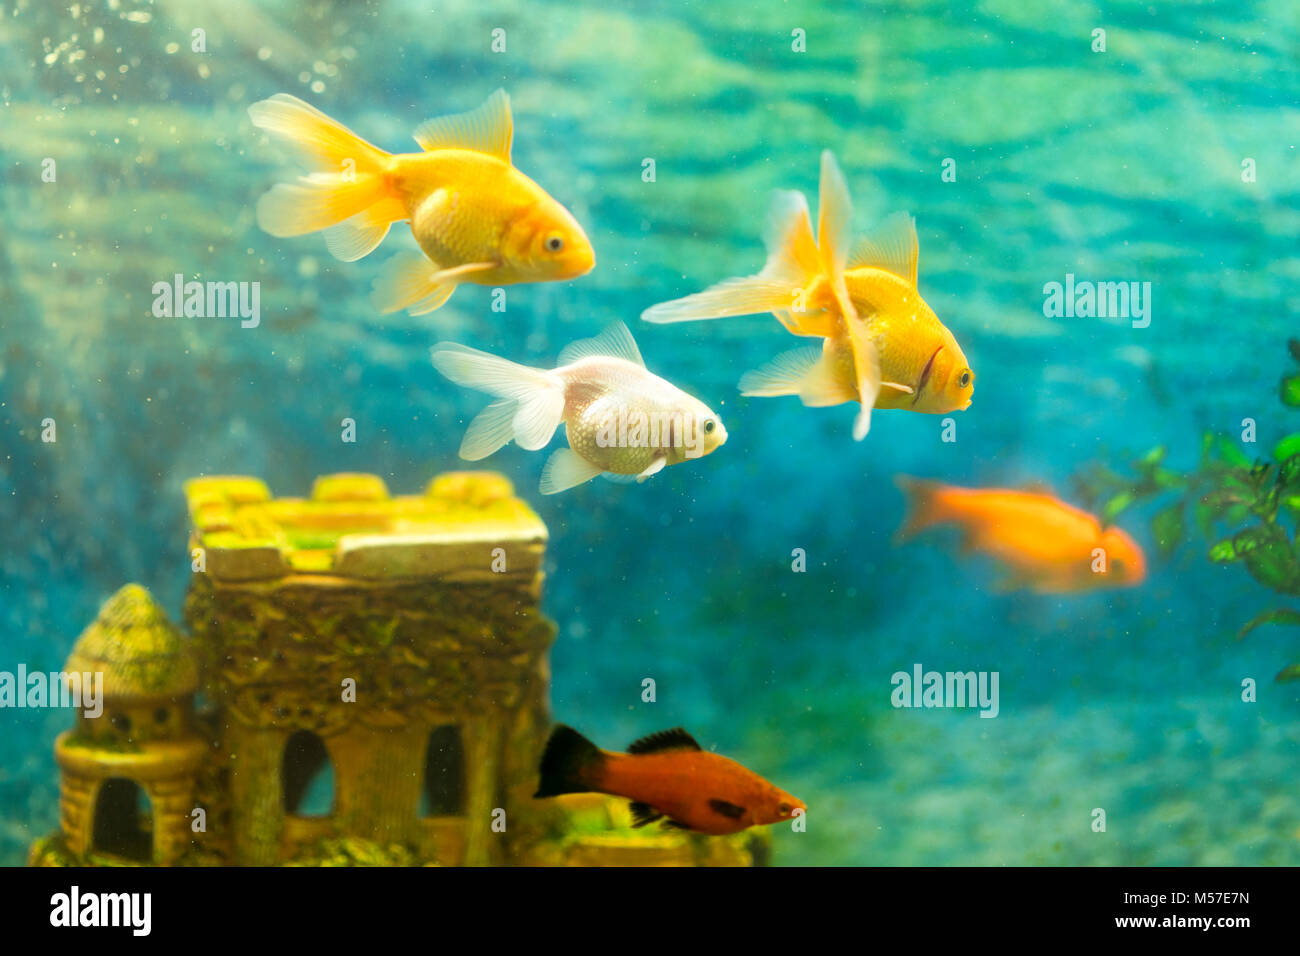 Goldfish in the aquarium on the background of a stone castle. Stock Photo